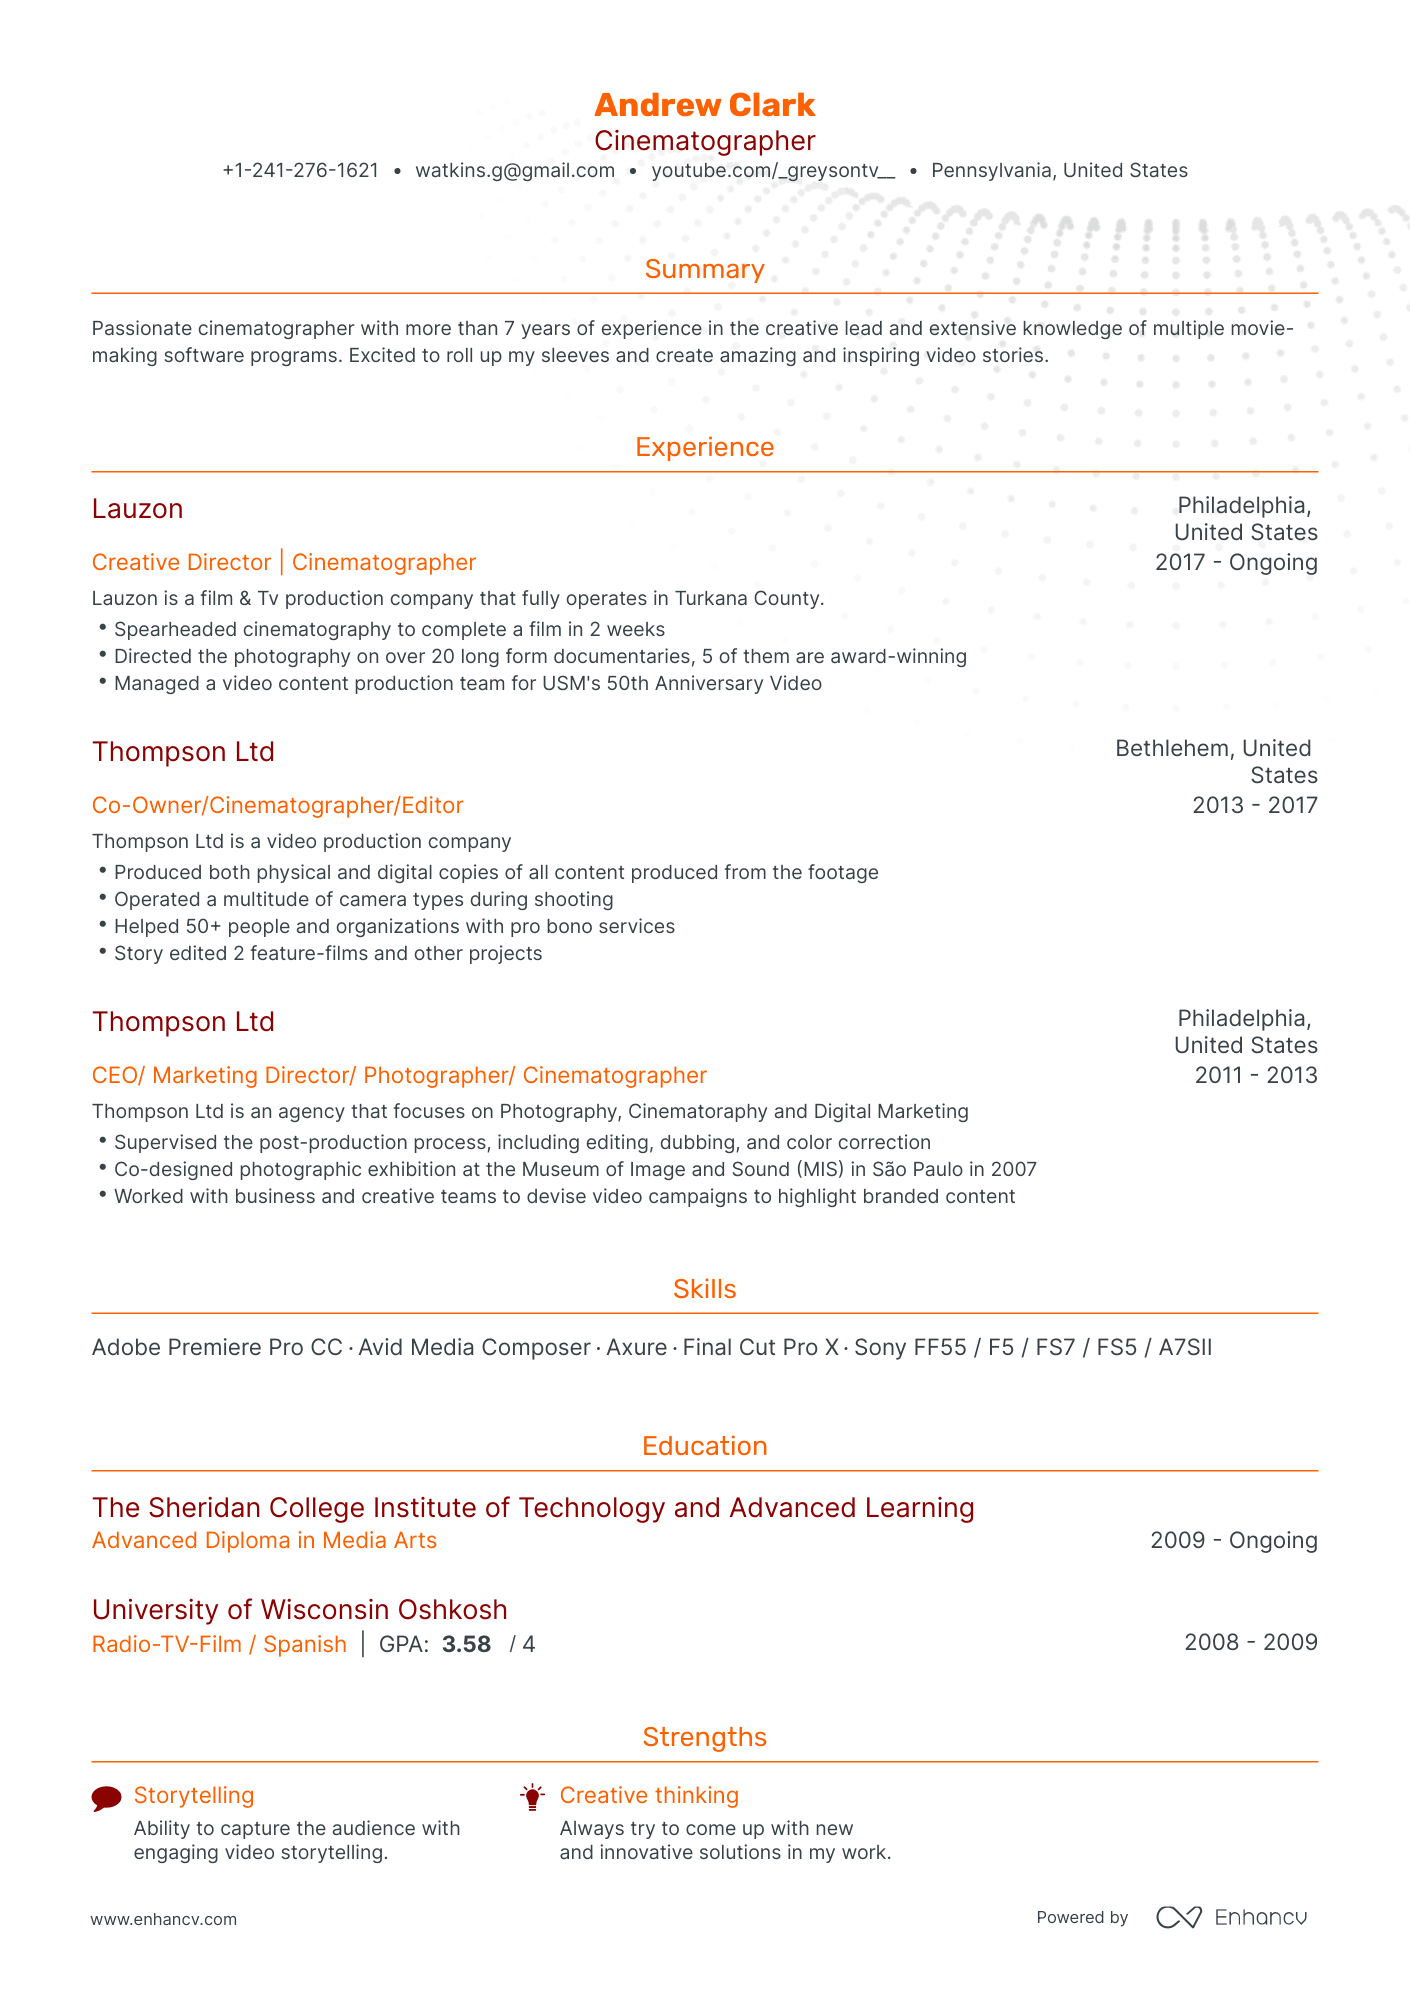 Traditional Cinematographer Resume Template